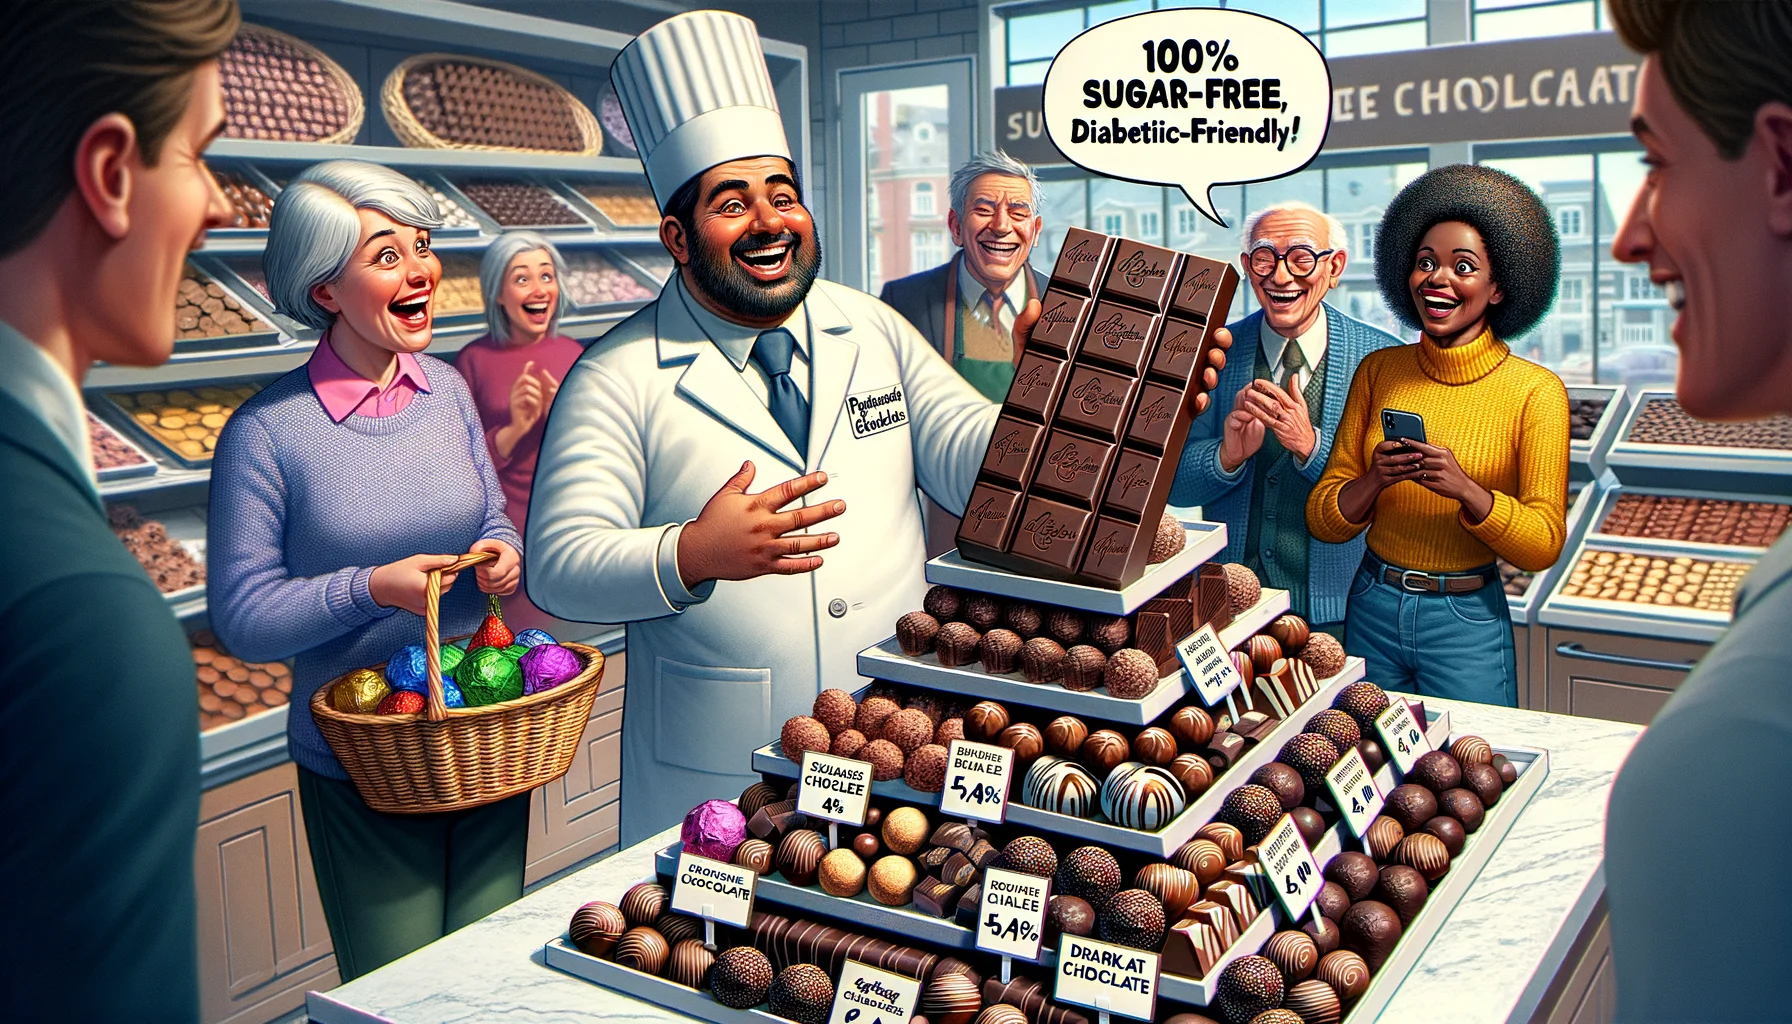 Imagine a humorous and realistic scenario enfolding in a bakery known for its diabetic-friendly chocolates. The central image is a pyramid display of assorted sugar-free chocolate treats - from pralines, truffles, and chocolate-covered nuts to dark chocolate bars. A friendly Baker, a Middle-Eastern man wearing his classic white uniform, is enthusiastically showing off a jumbo dark chocolate bar labeled '100% sugar-free, diabetic-friendly!' to a surprised customer, a Caucasian woman. She is holding a small shopping basket, her eyes widened in disbelief at the size of the sugar-free chocolate bar. Around them, other customers - a South Asian man and a Black woman - are amused, holding their own baskets filled with chocolates, chuckling at the scene. The atmosphere is cheerful, capturing the perfect blend of comic and real-world scenario.